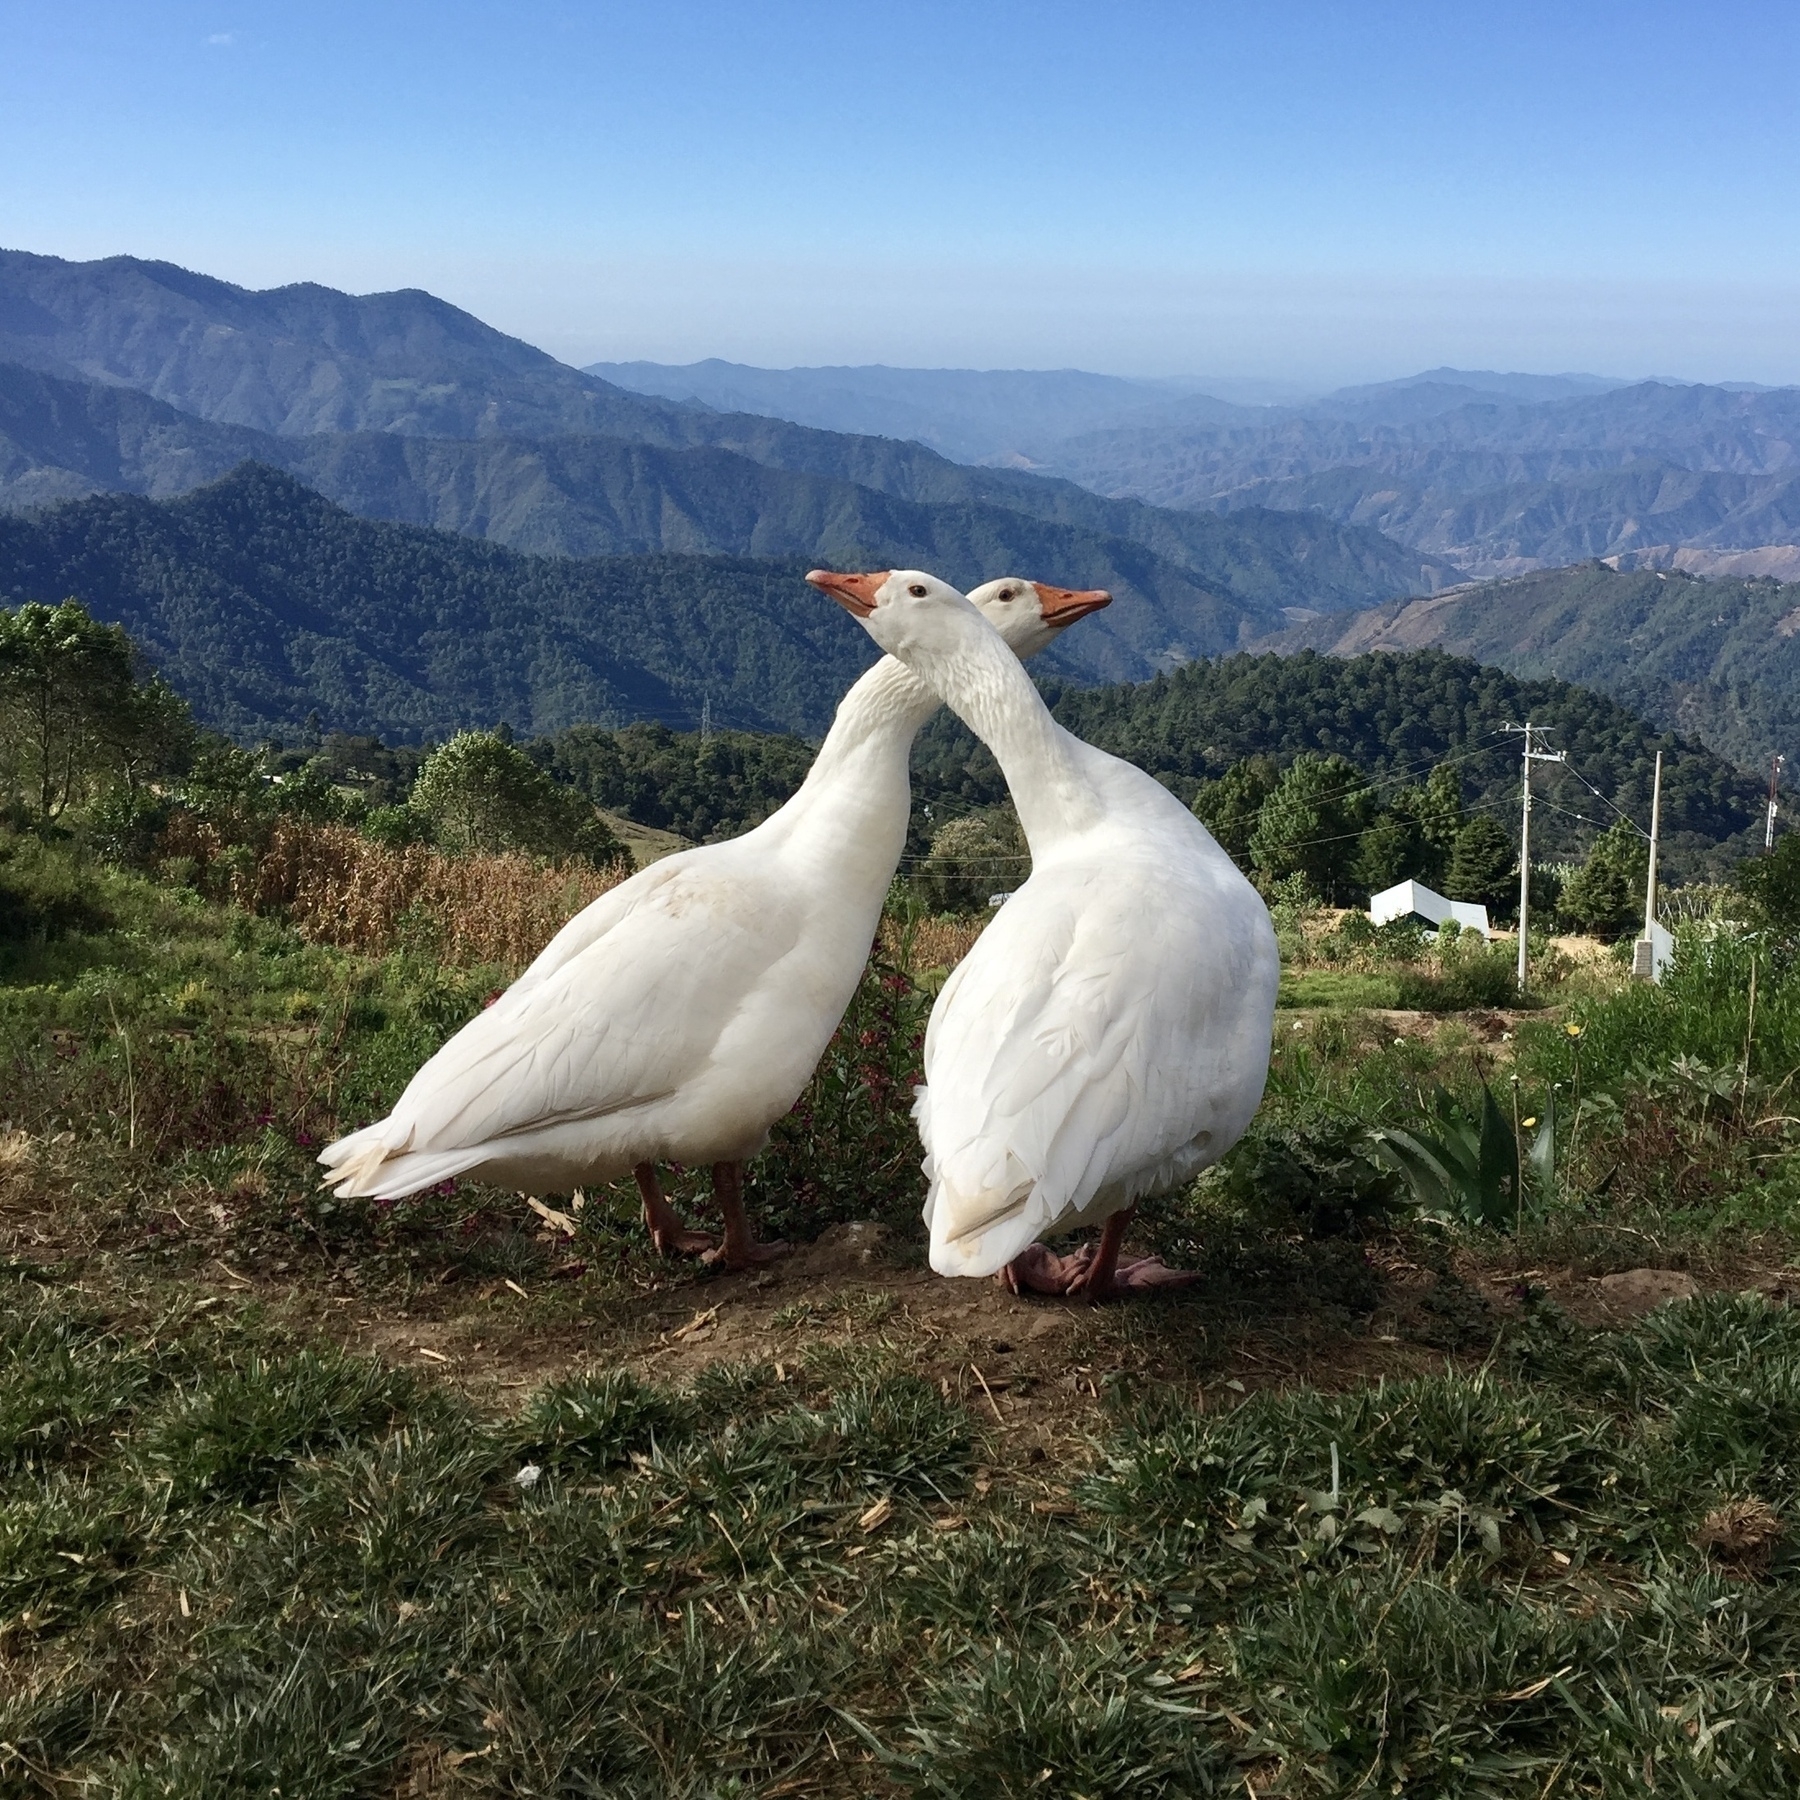 Two white geese with their heads overlapping one in front of the other, looking in opposite directions in the mountains of Oaxaca.